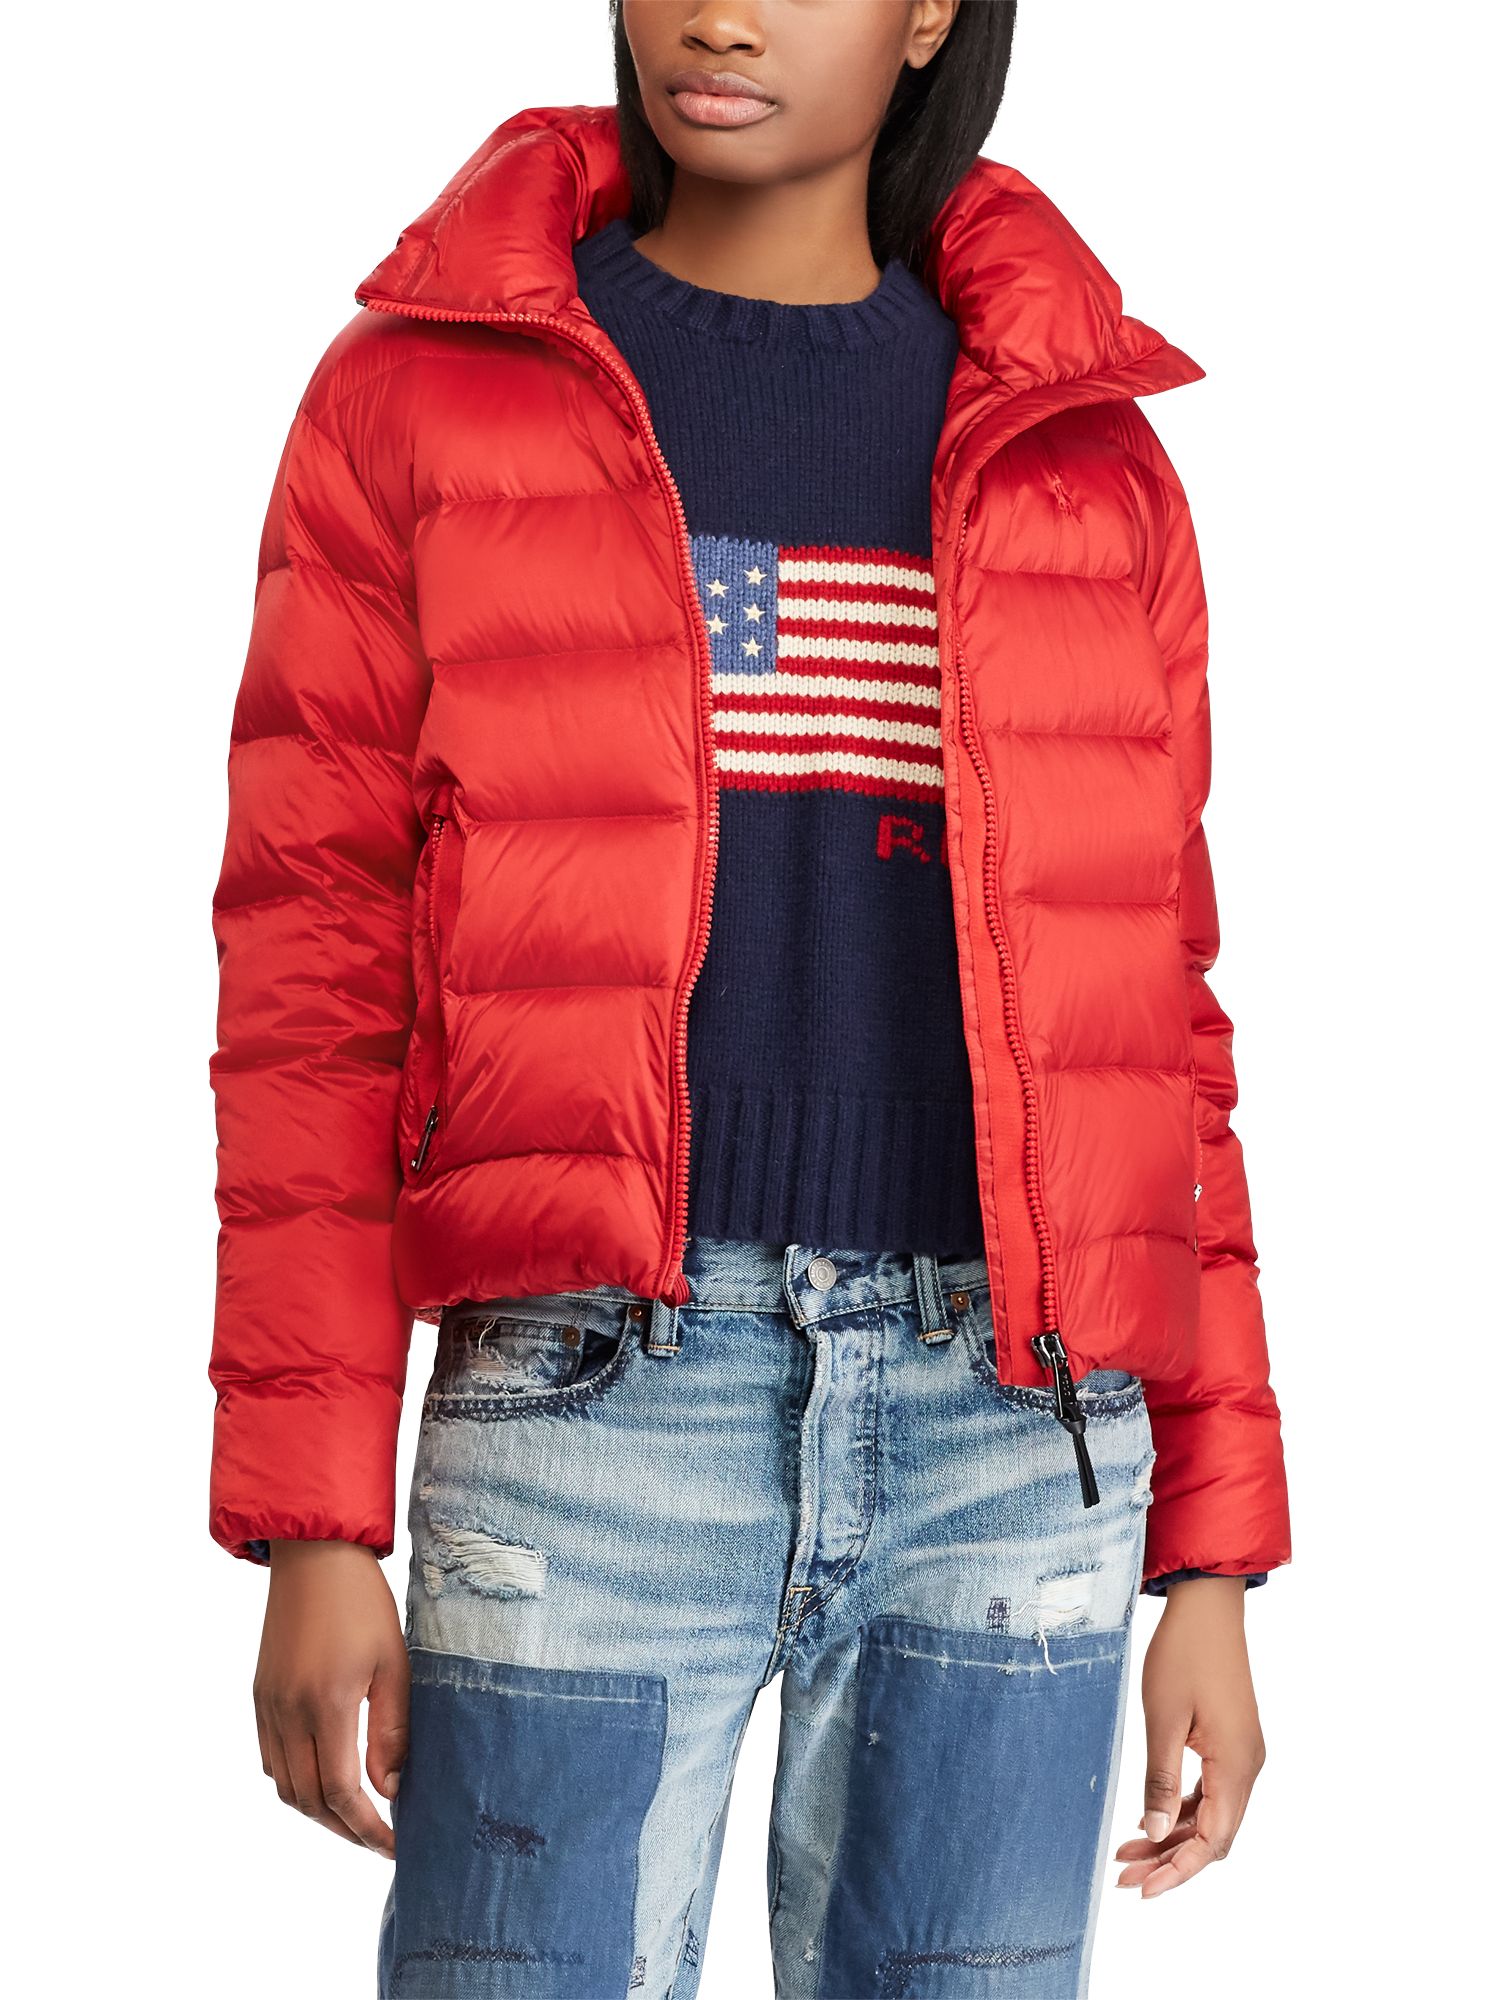 red polo jacket women's